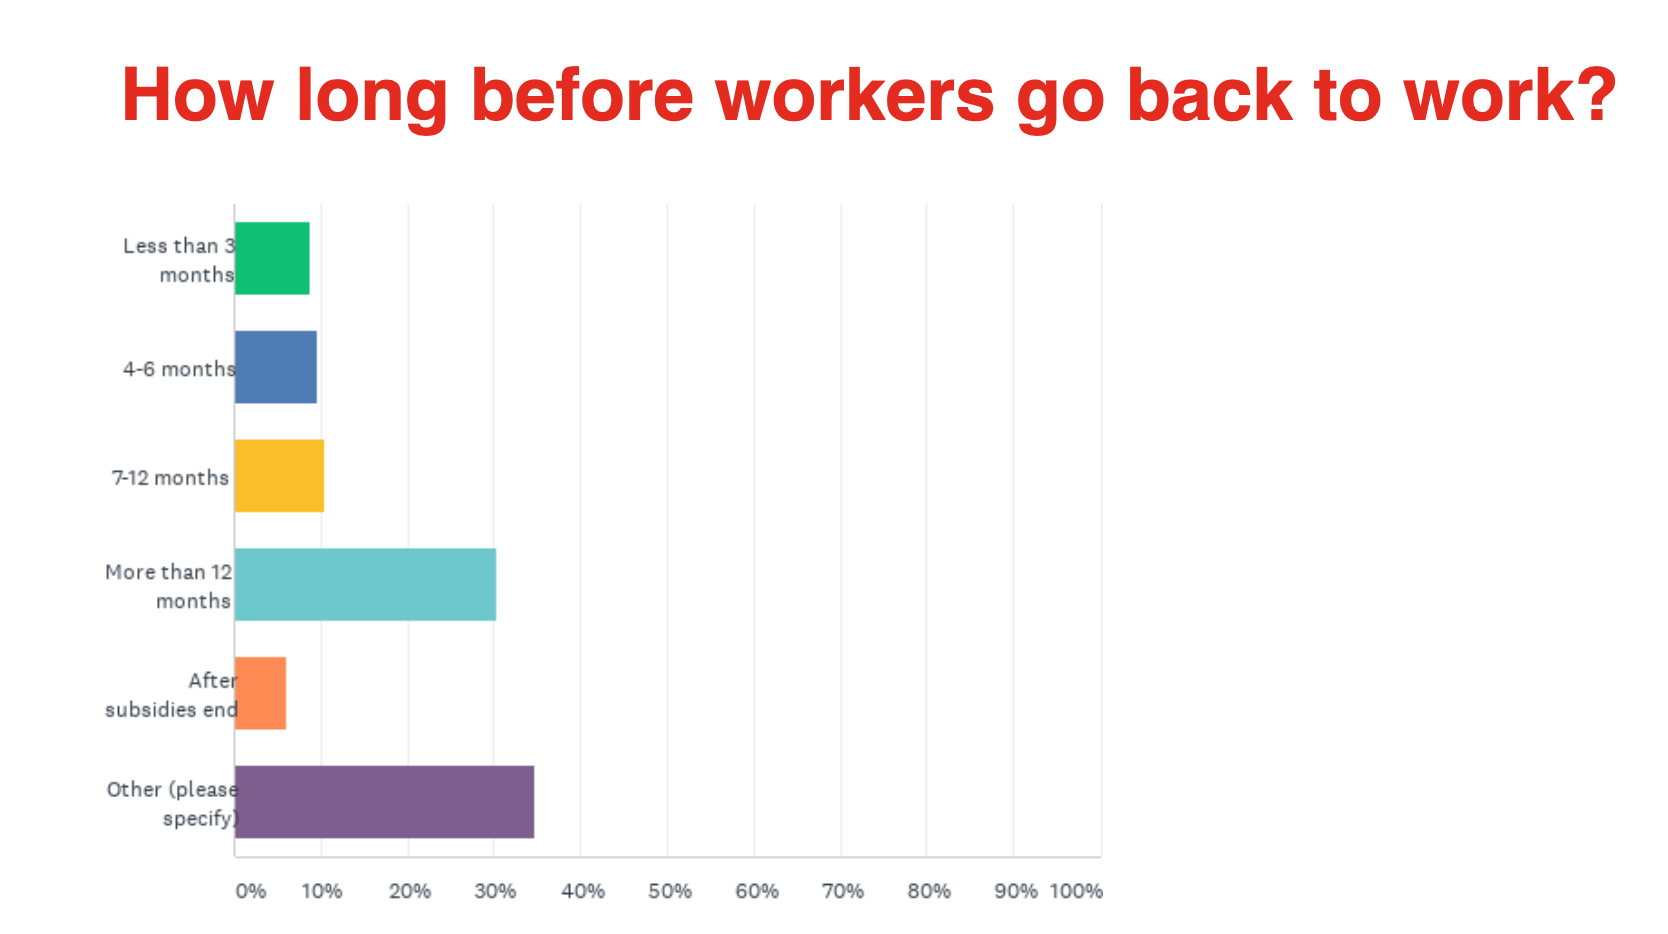 How long before you look for work? 30% say more than 12 months